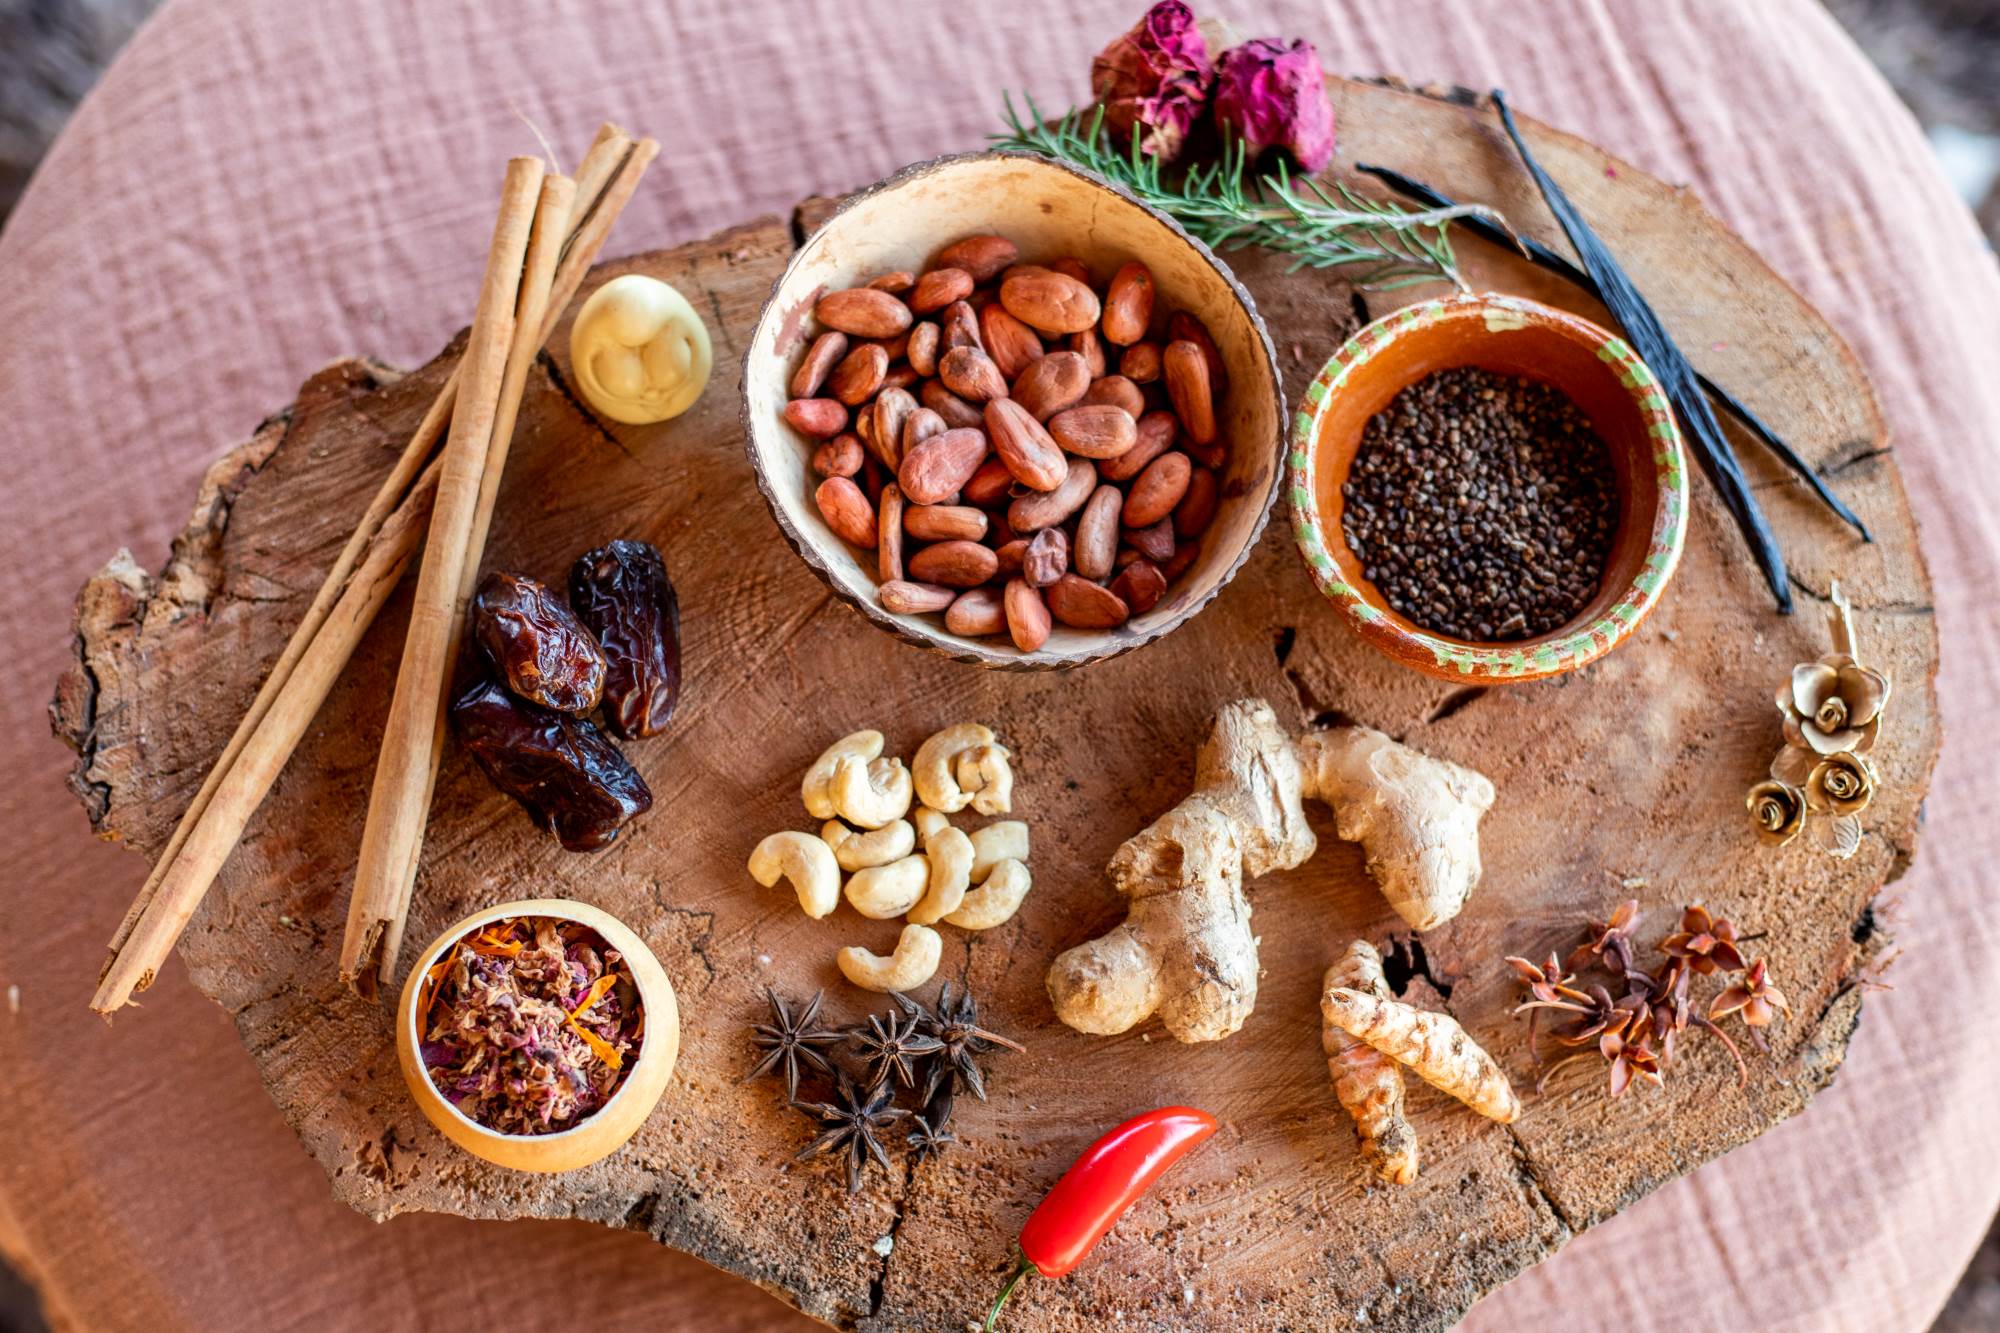 A collection of wholesome ingredients arranged neatly on a cutting board, representing the idea of mindful meal preparation for intuitive eating